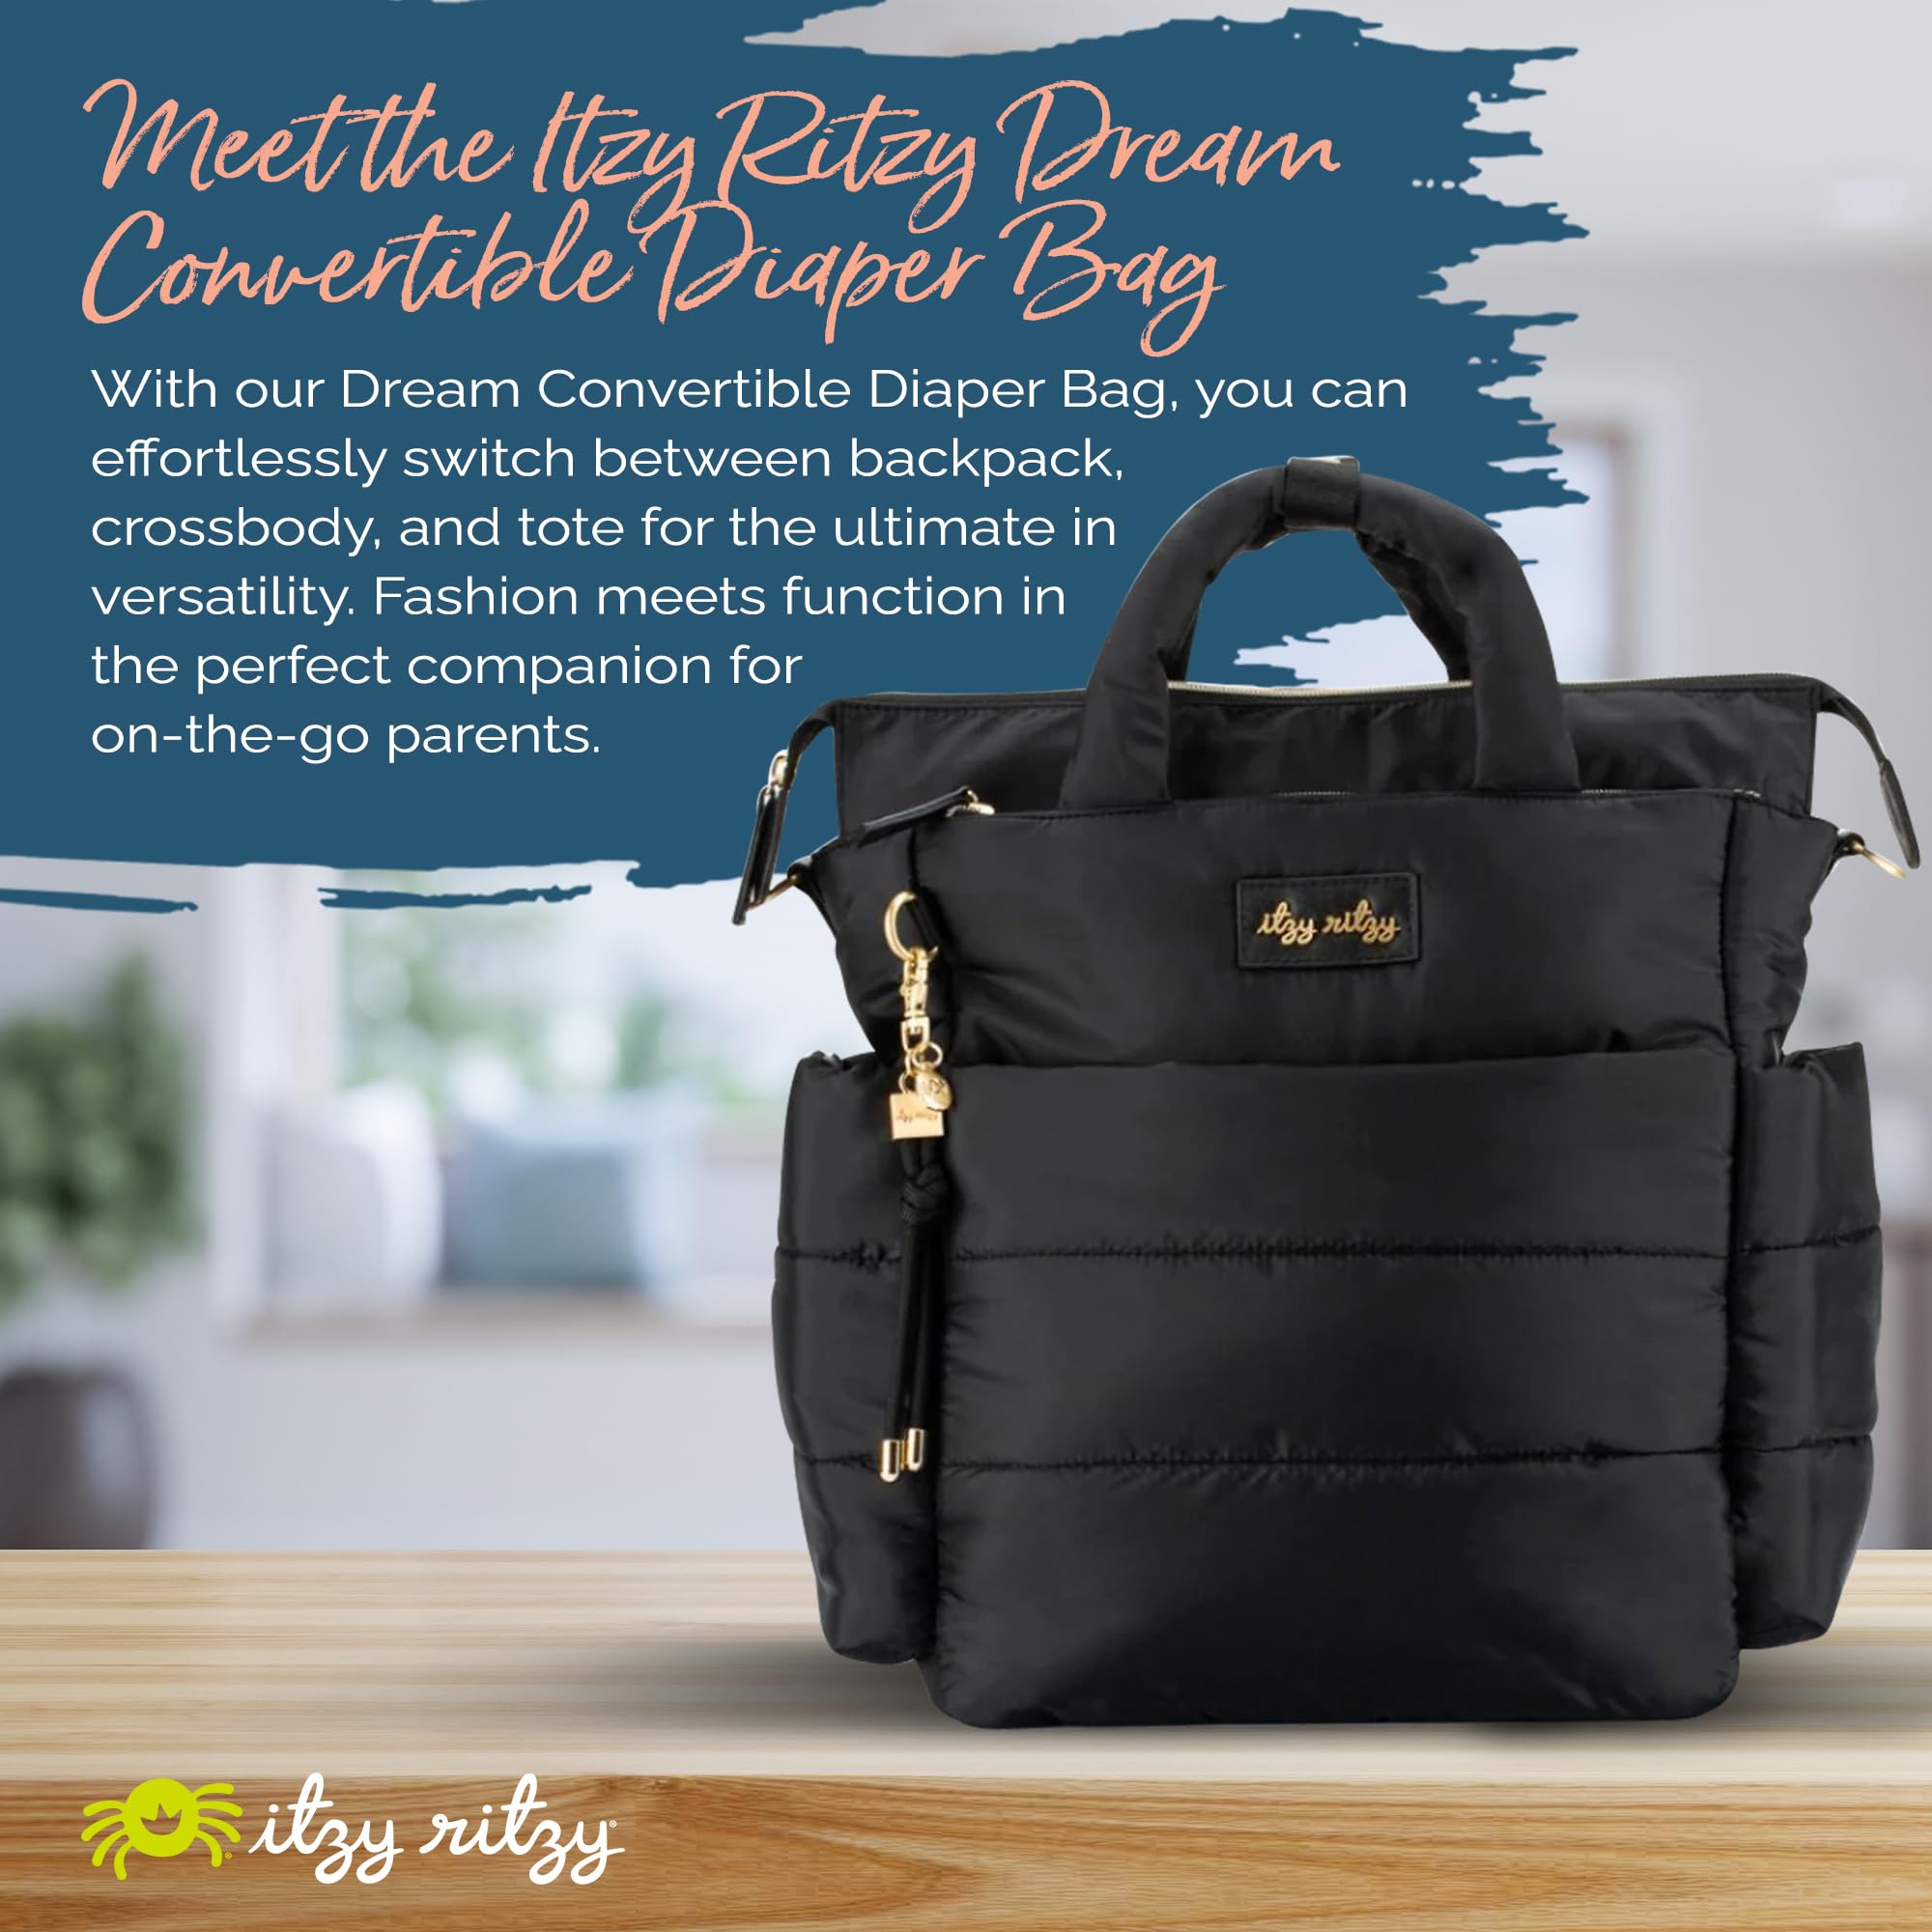 Itzy Ritzy Dream Convertible Diaper Bag Tote Backpack - Baby Diaper Bag - 14 Pockets Including 2 Ins & Packing Cubes - Set of 3 Lightweight Packing Cubes or Travel Organizers